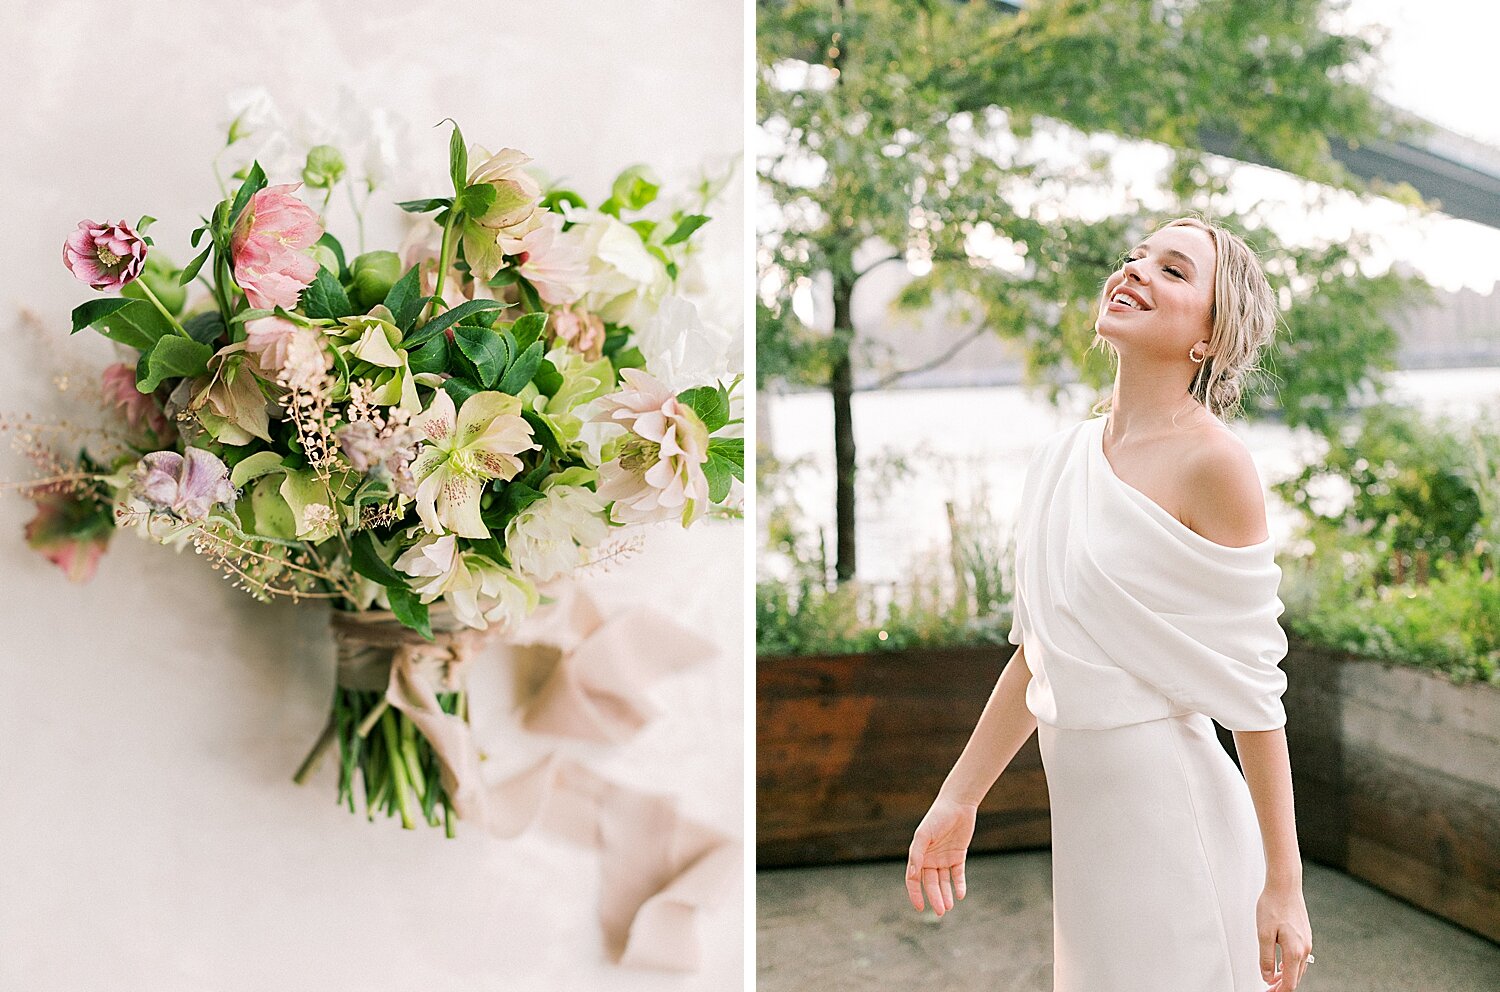 details for intimate wedding ceremony at Celestine | Asher Gardner Photography | Intimate Ceremony in DUMBO New York